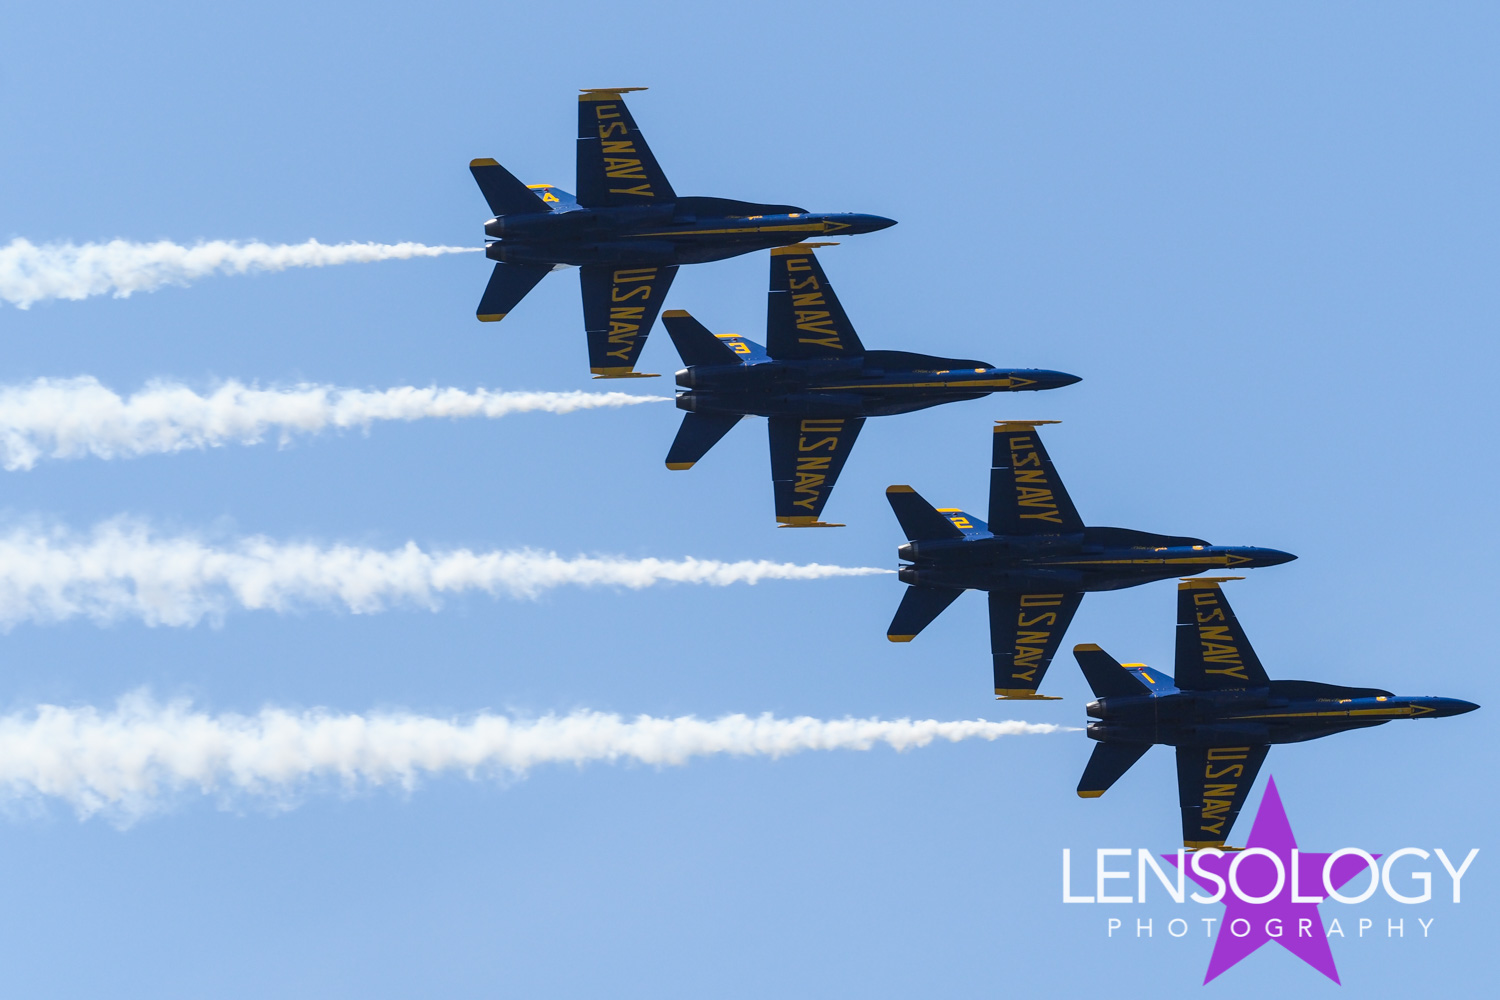 LENSOLOGY.NET - Images from the 2019 Fort Lauderdale Air Show, Ft Lauderdale, FL.
All images are copyright of Lensology.net
Email: info@lensology.net
www.lensology.net